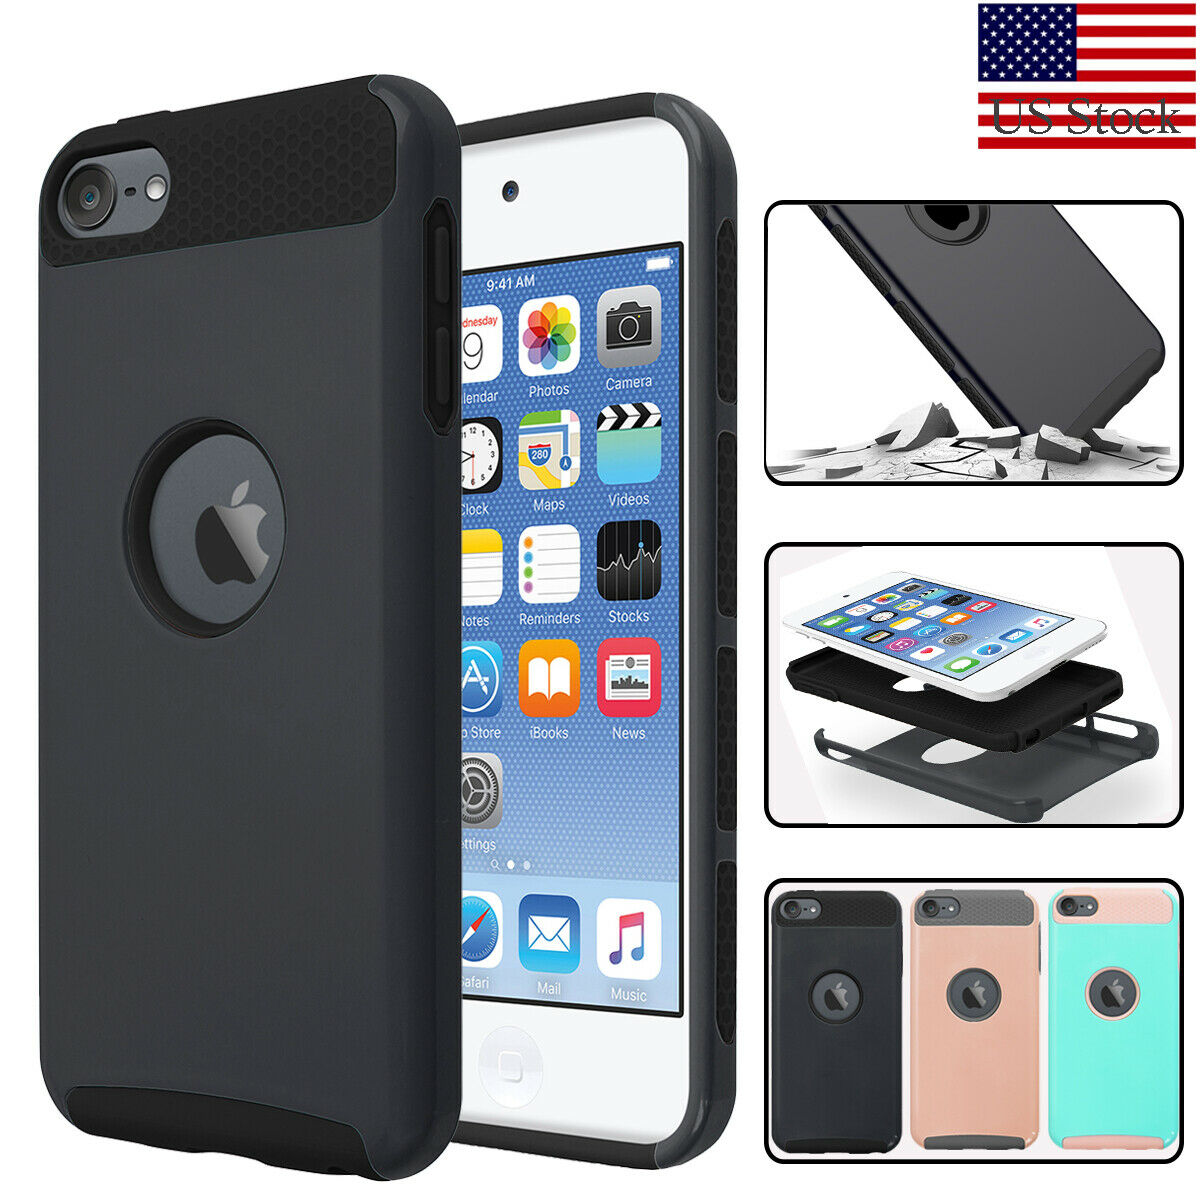 For Ipod Touch 5th/ 6th/7th Gen Shockproof Impact Rugged Rubber Hard Case Cover